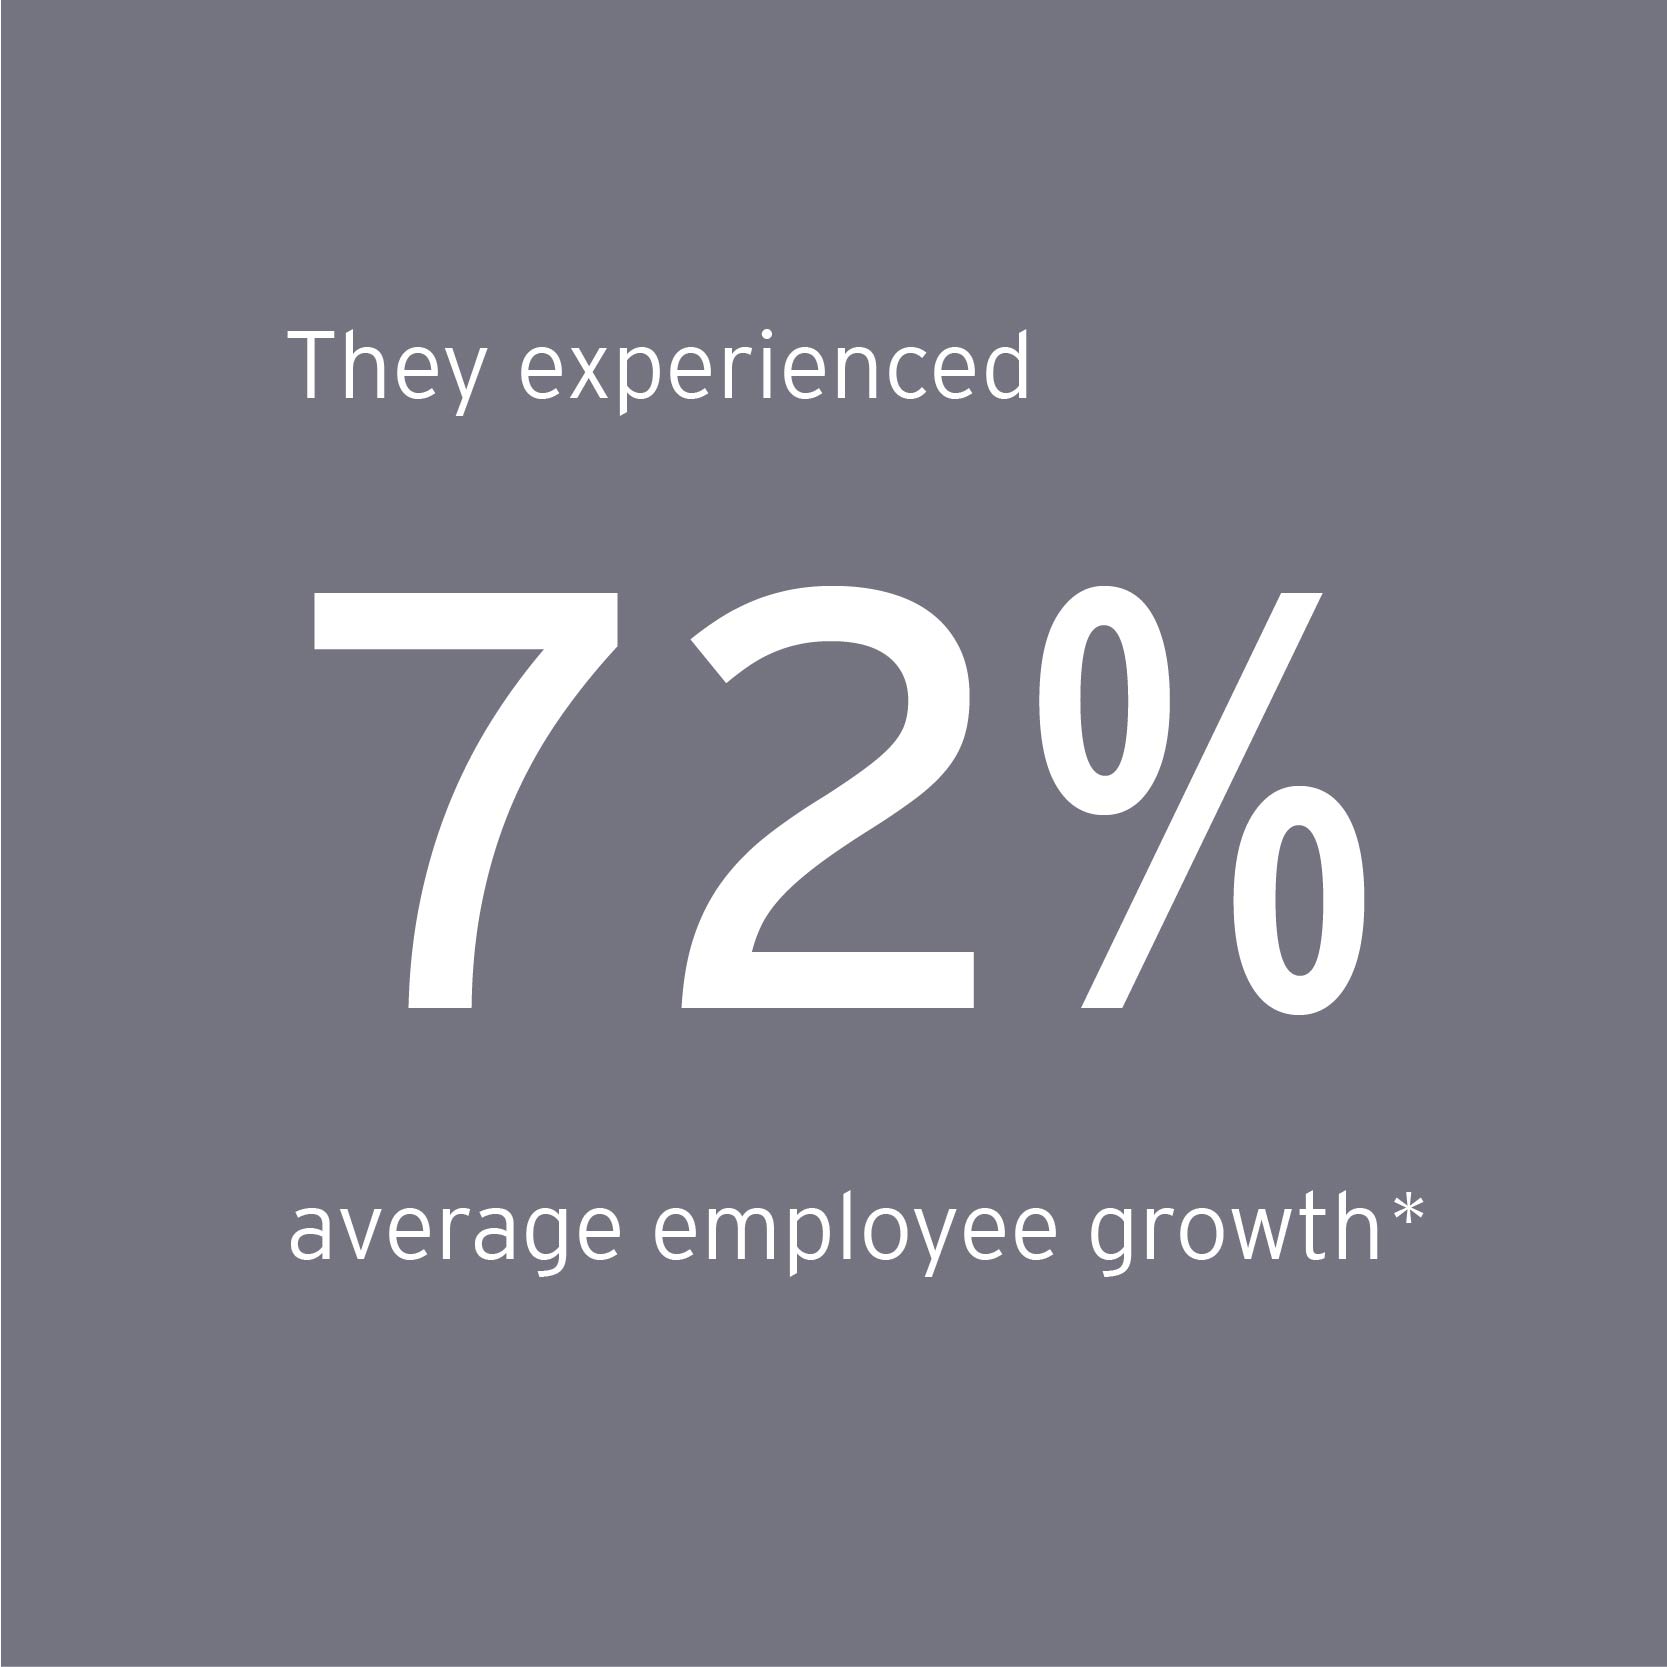 EOY New York finalists experienced 72% average employee growth